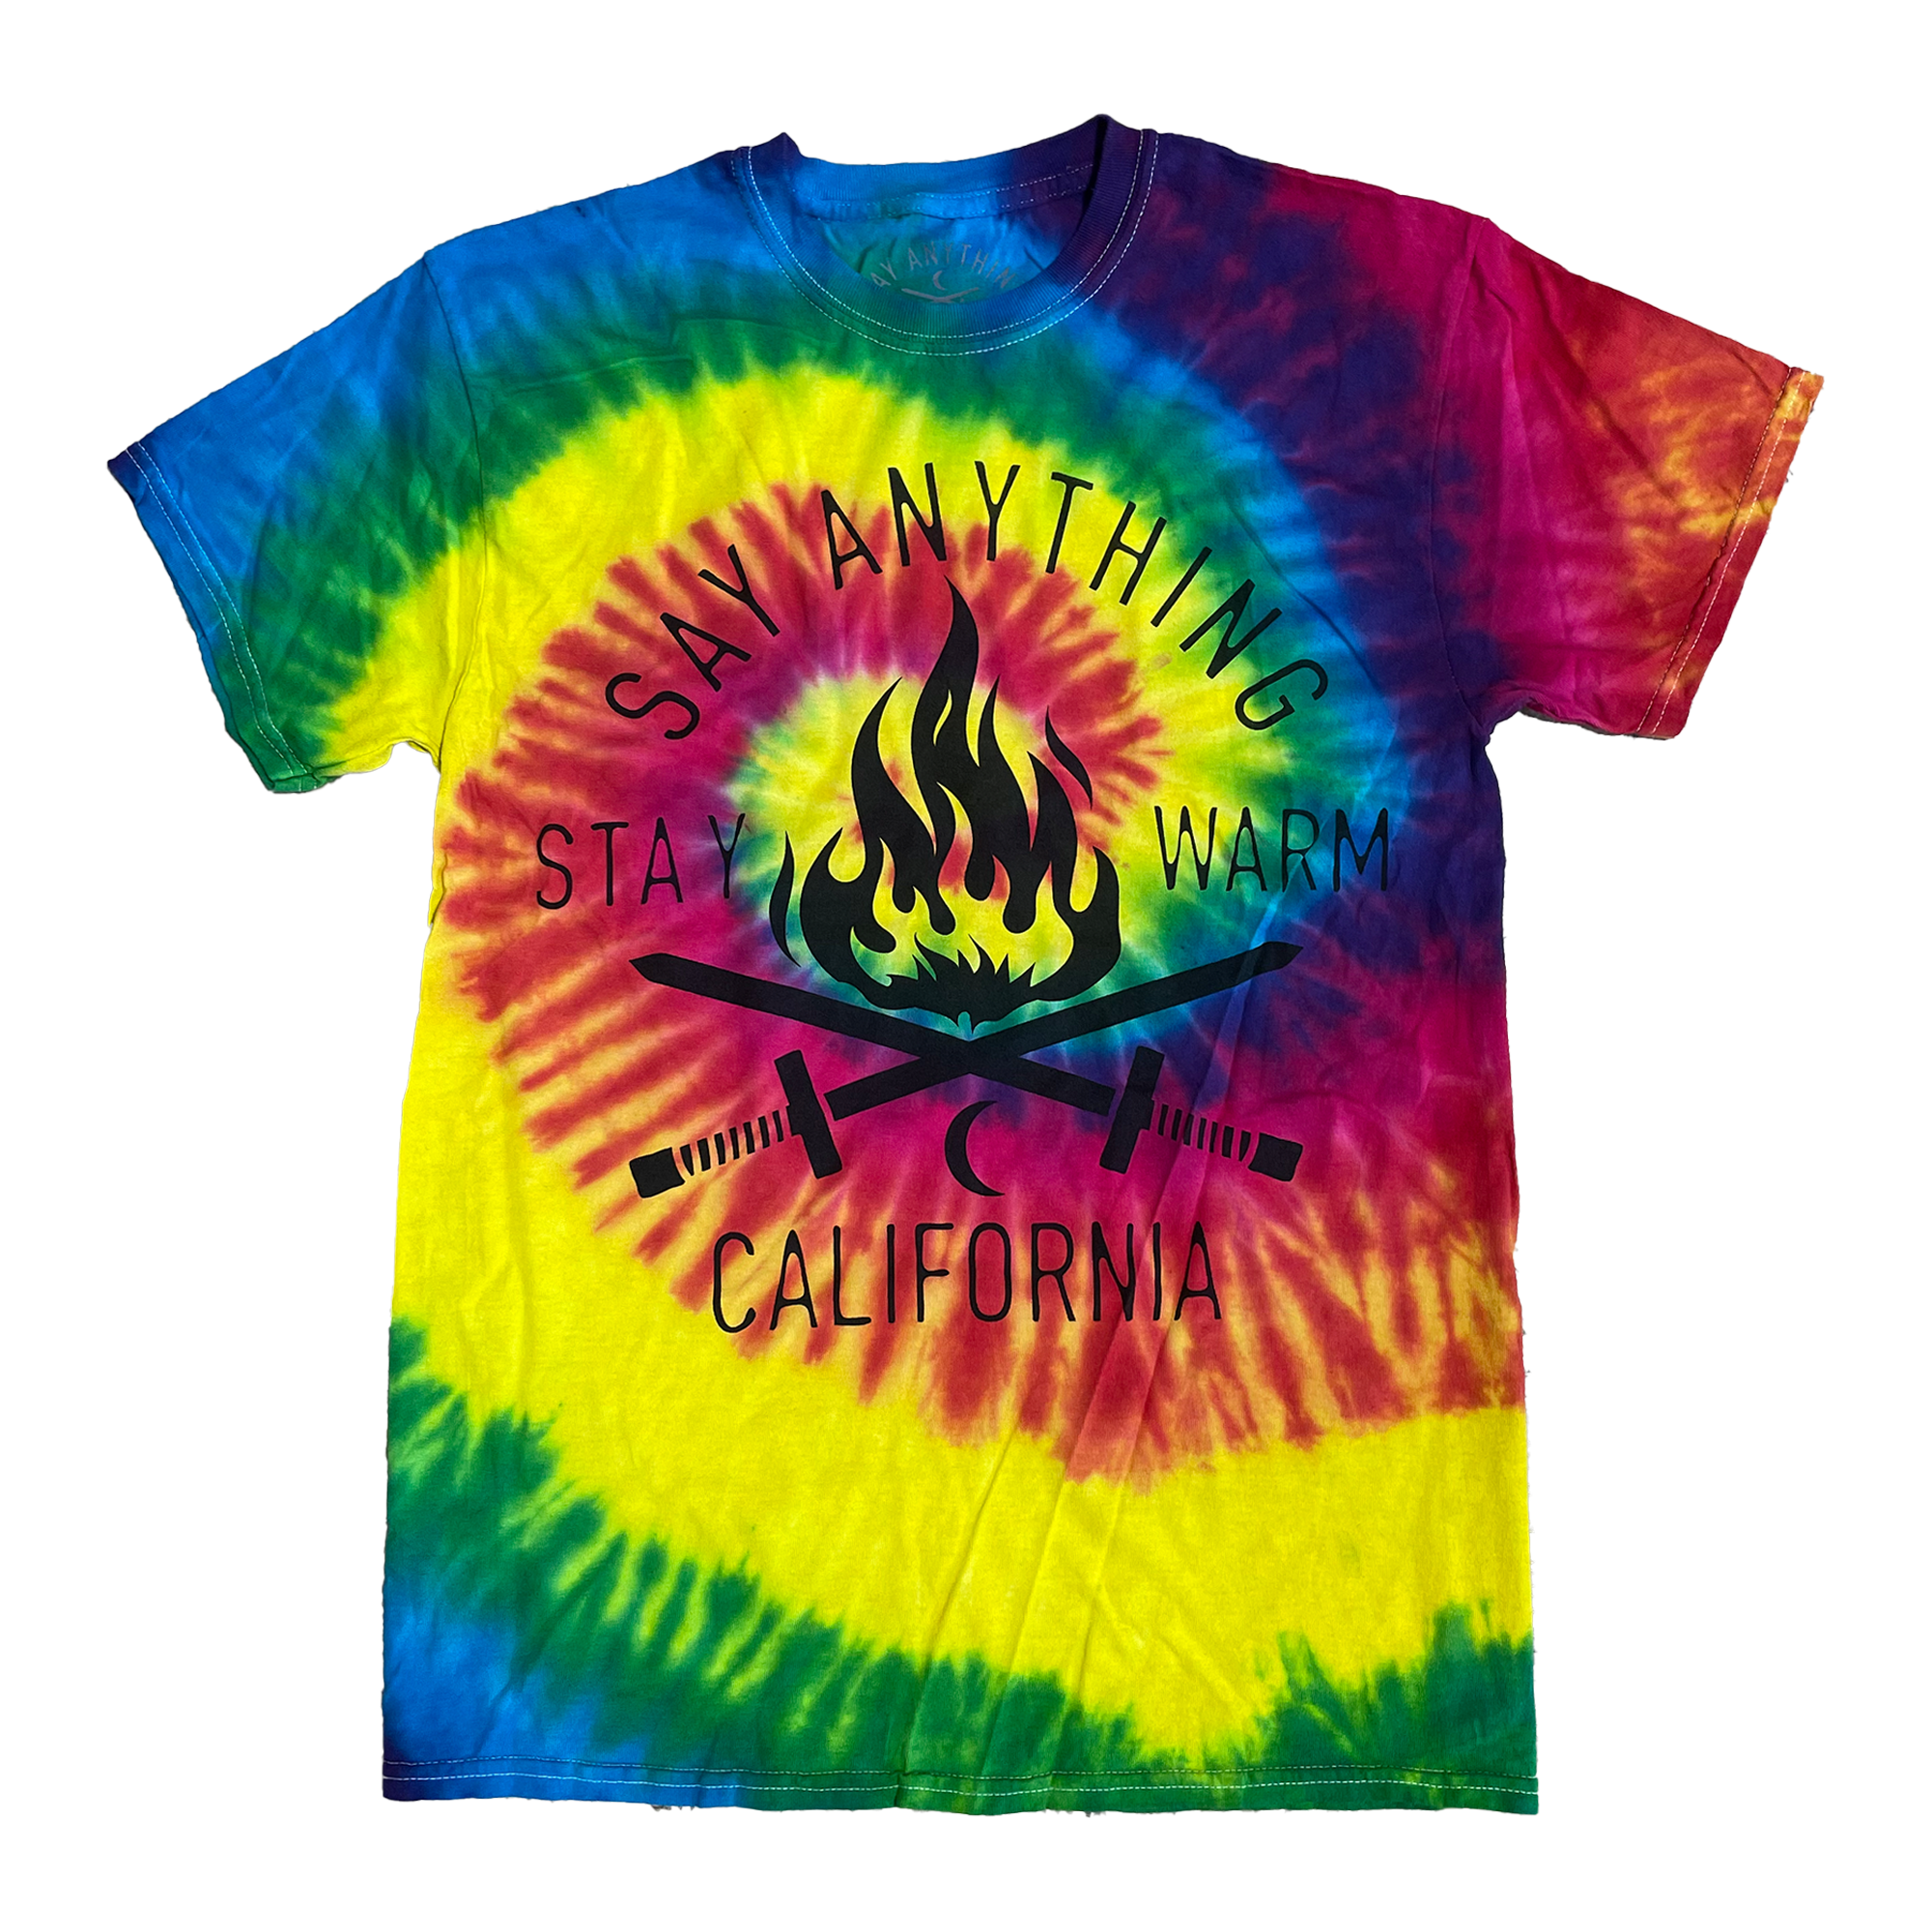 Say Anything - Stay Warm Tie Dye